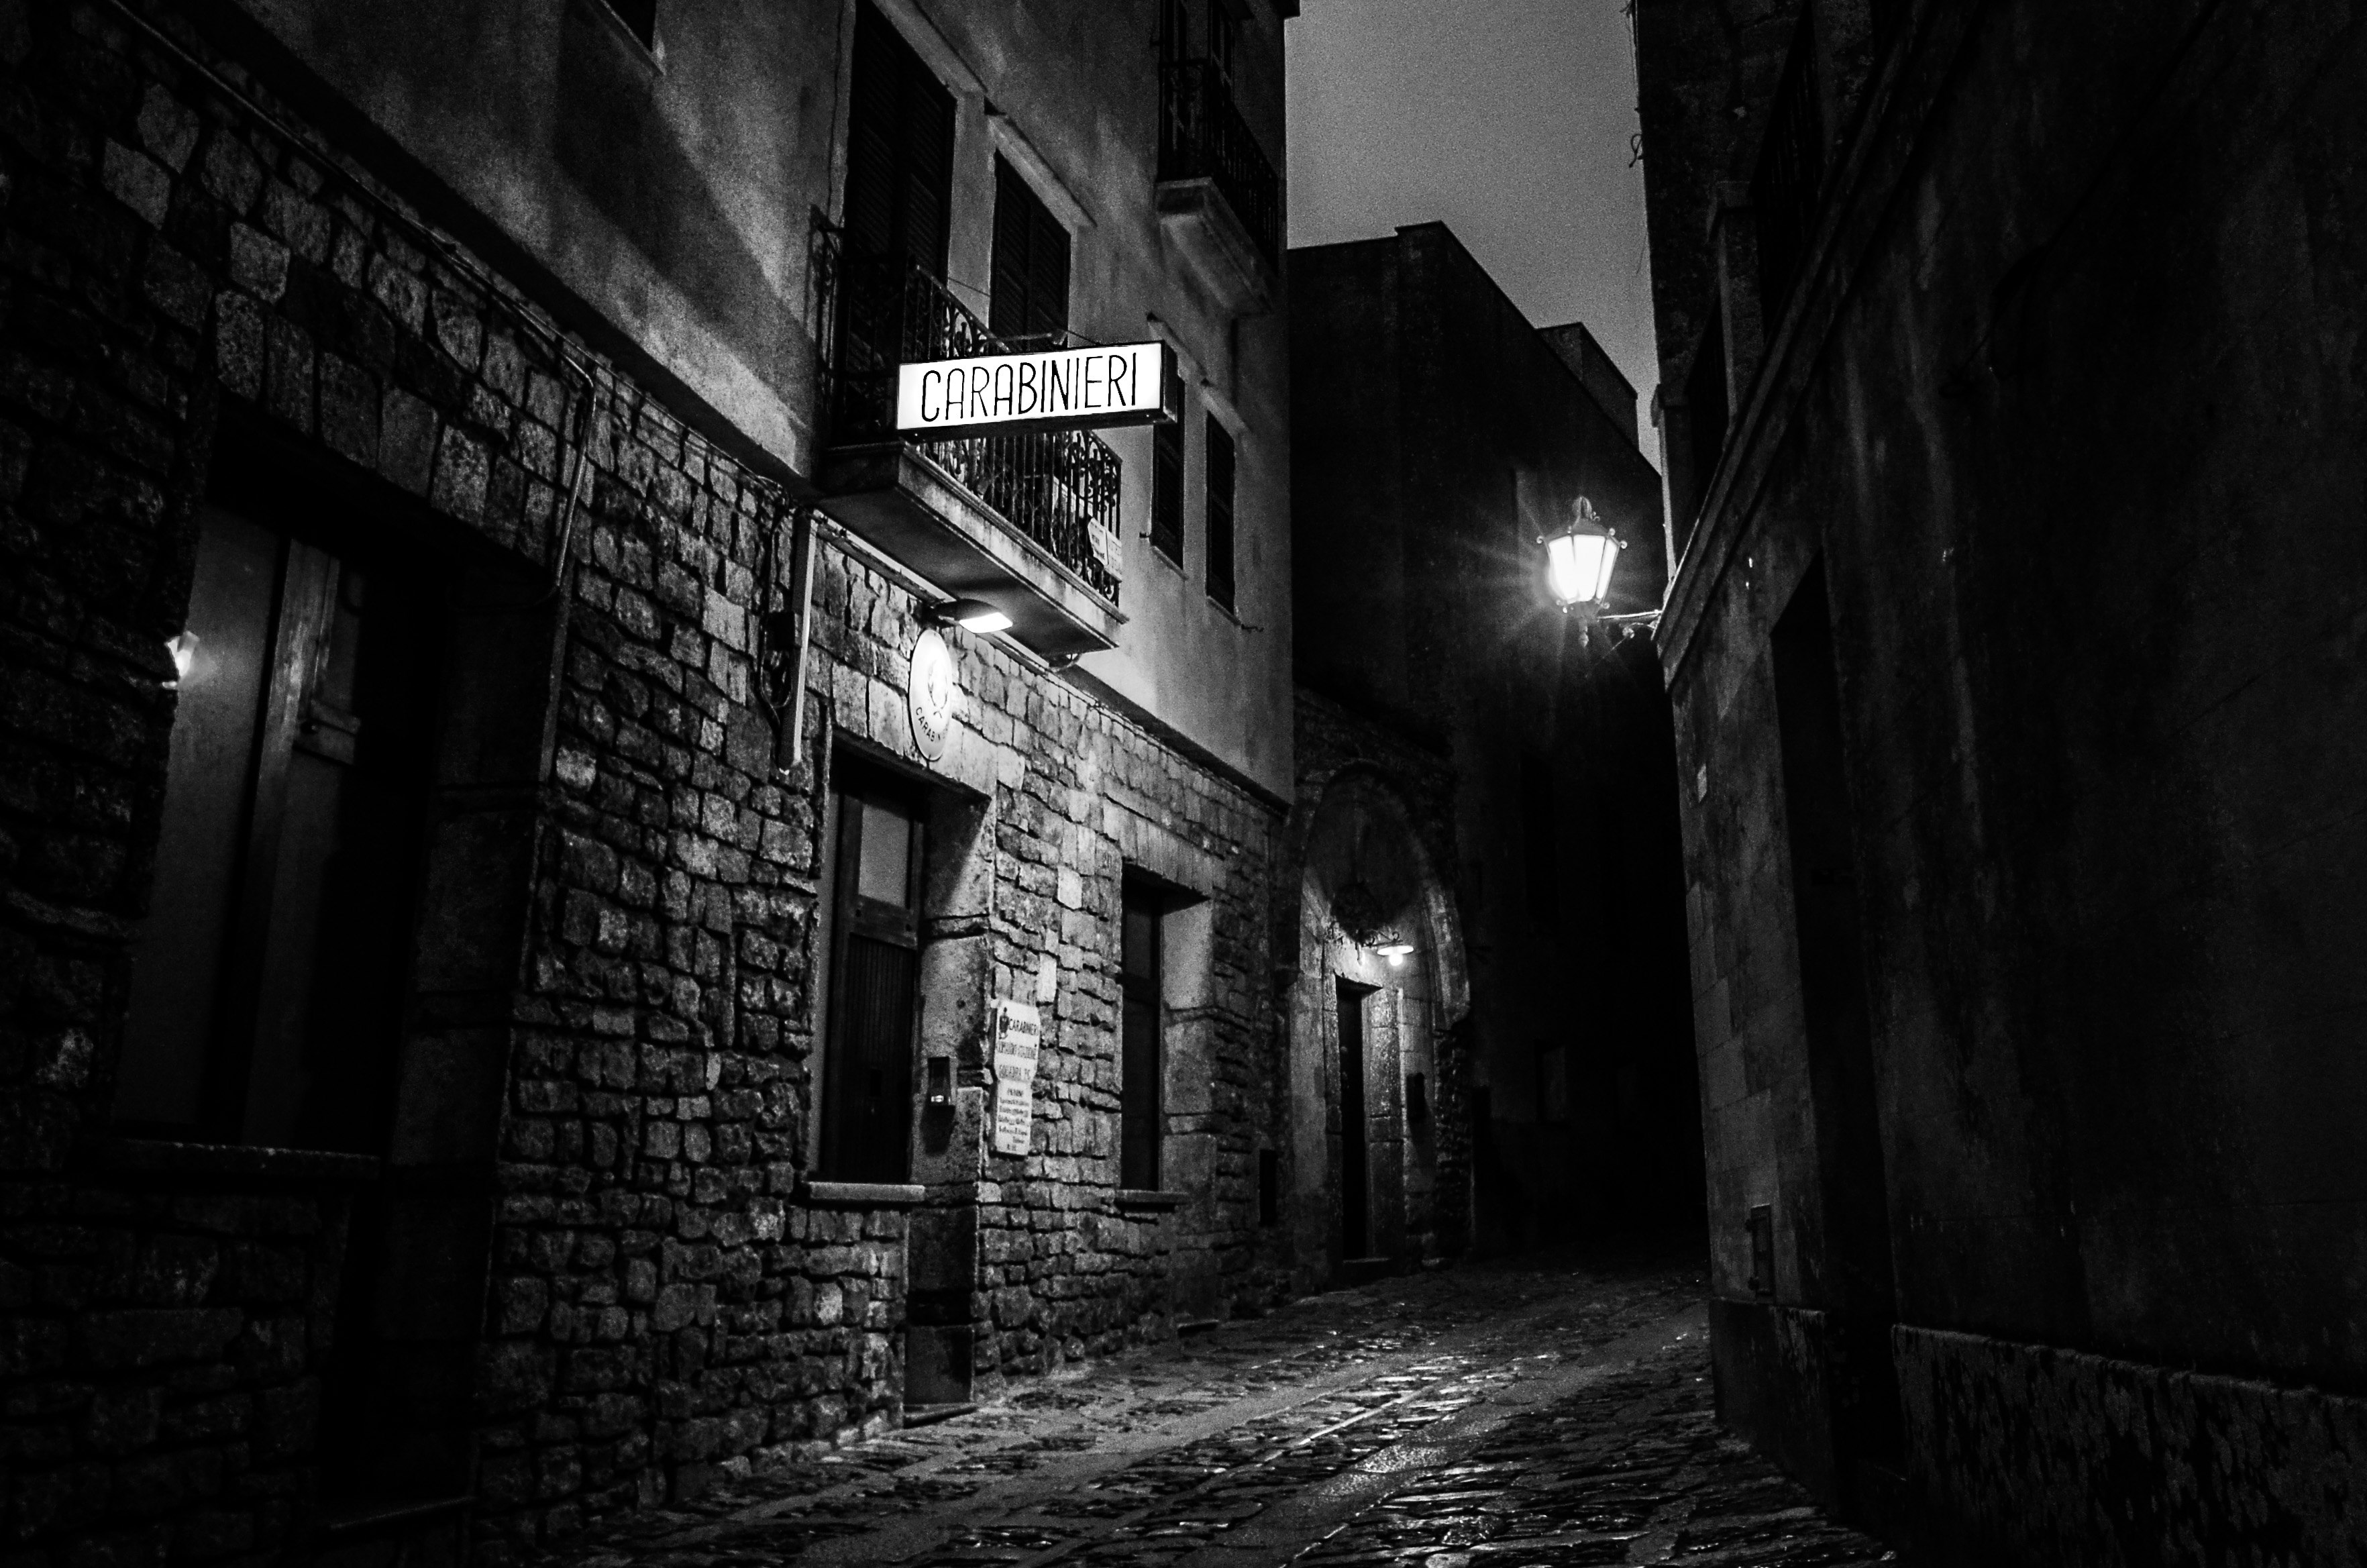 city alleyway with Carabineri signage during nighttime